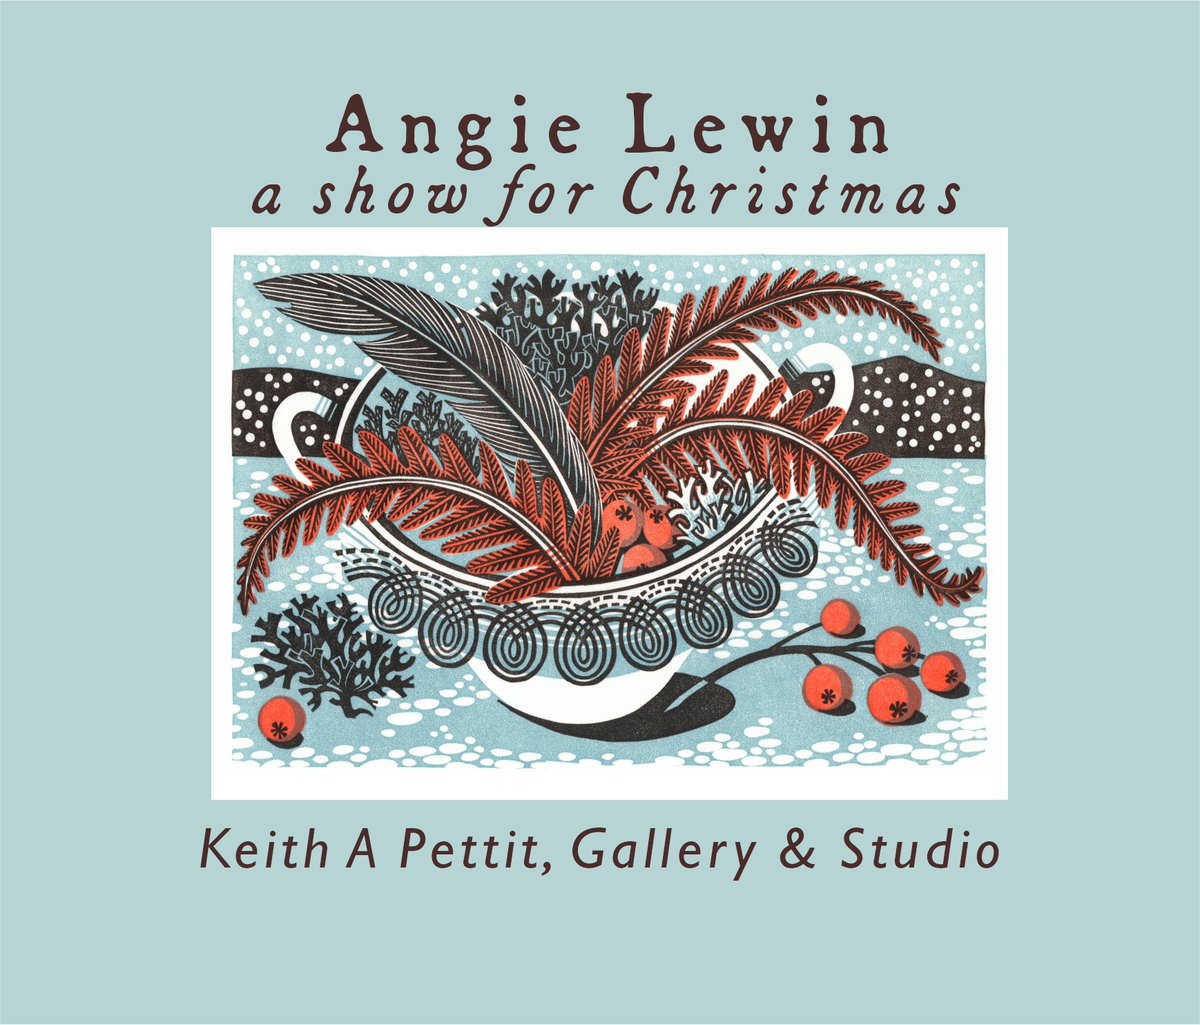 Almost time for my Christmas Open Studio. Featuring the work of the incredible Angie Lewin. Starts next Tuesday.
I look forward to seeing you, I'll have the workshop fire lit ready to welcome you. https://t.co/BAh88nxmID